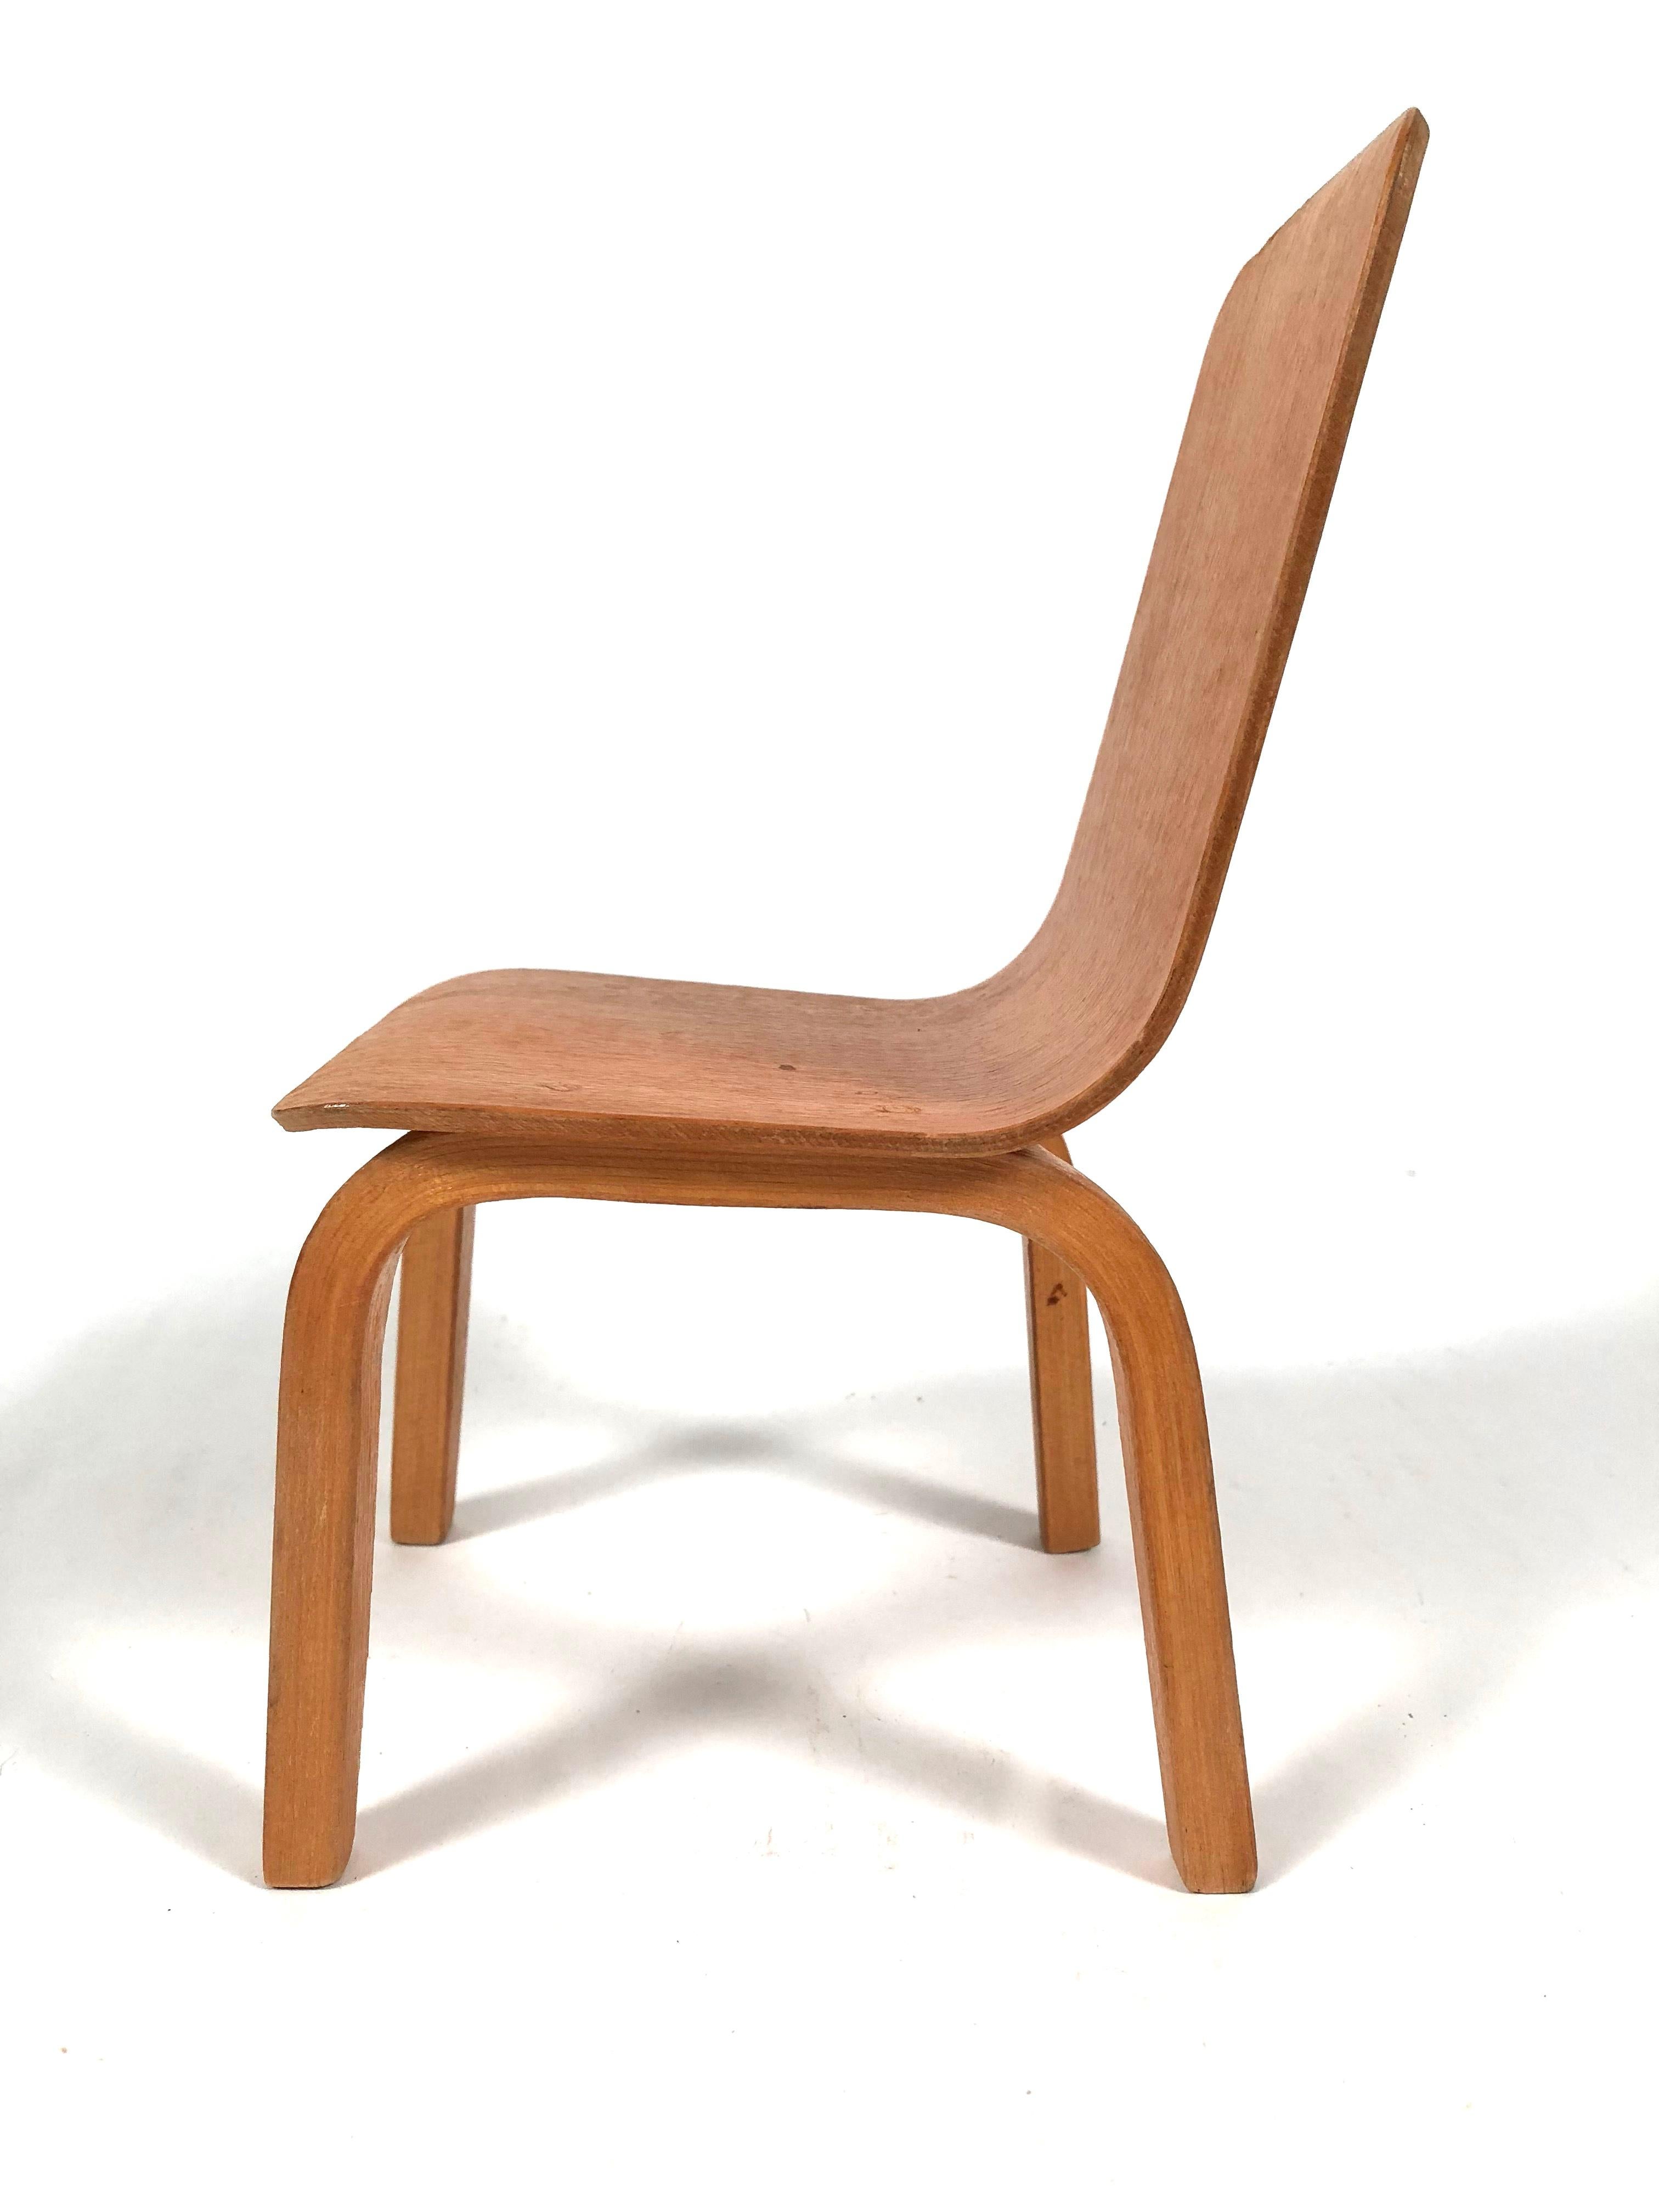 Mid-20th Century Russian Bentwood Chair Salesman's Model